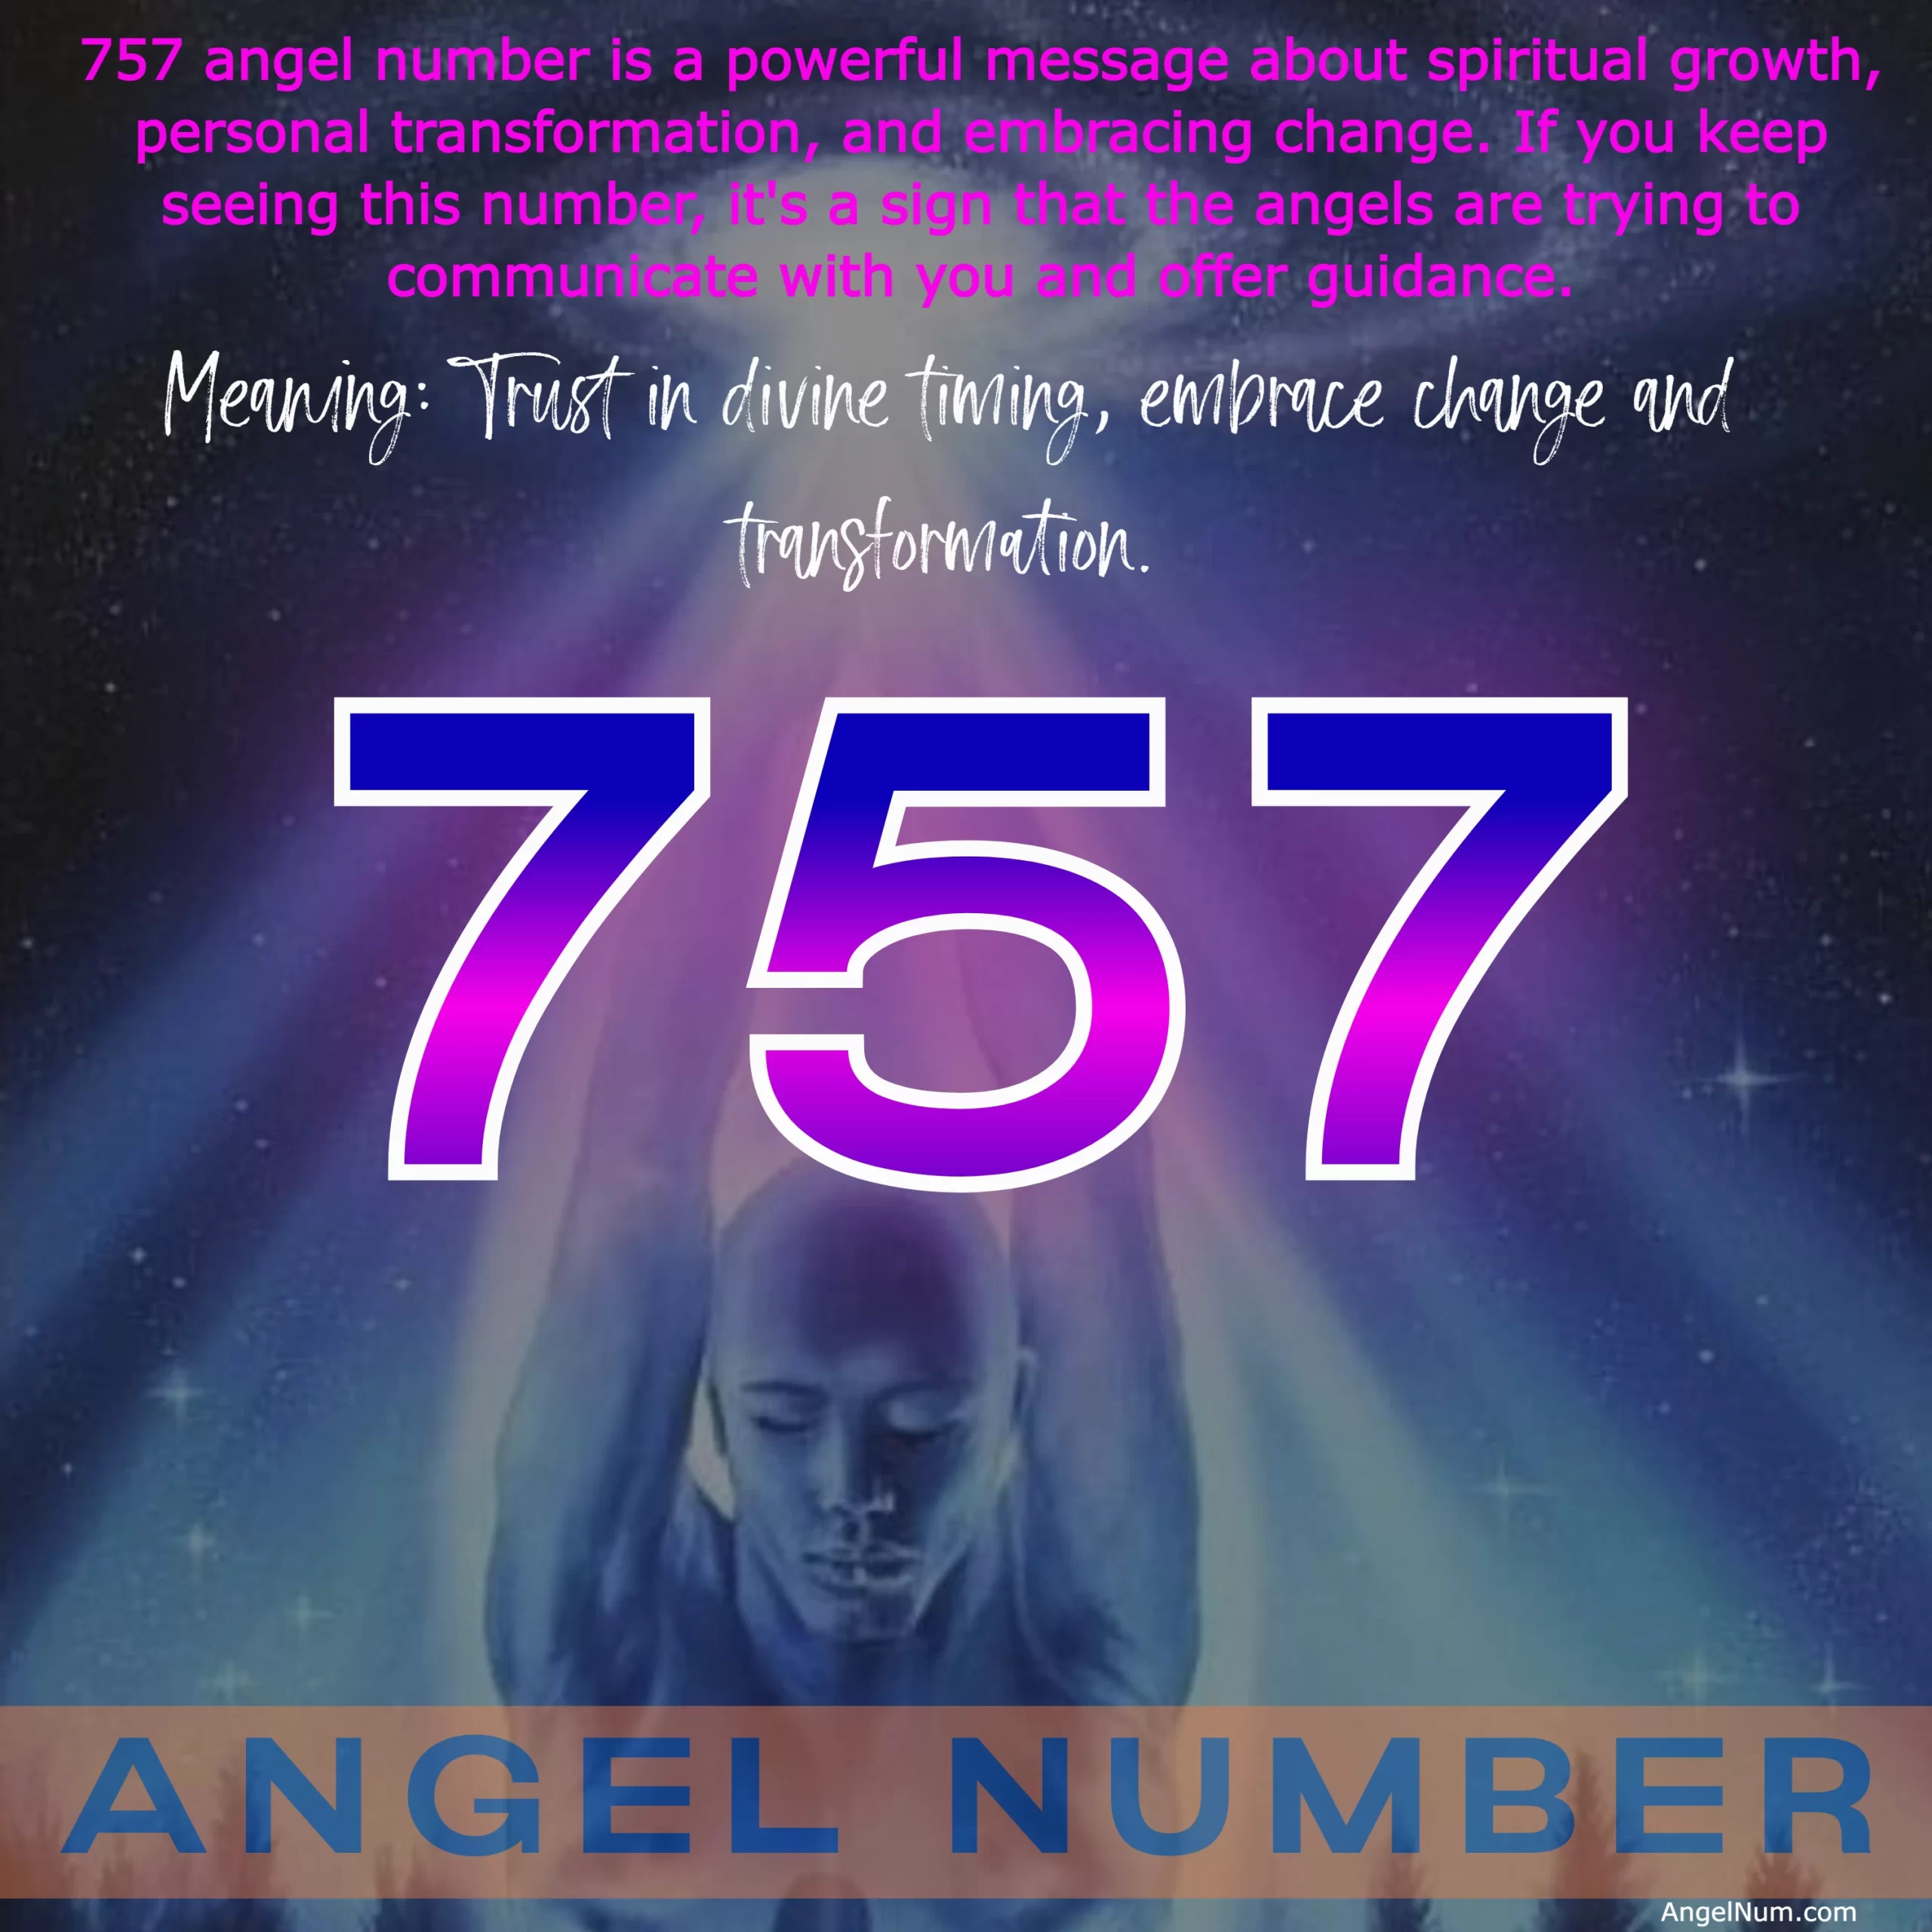 Angel Number 757: Trusting Divine Timing and Embracing Change